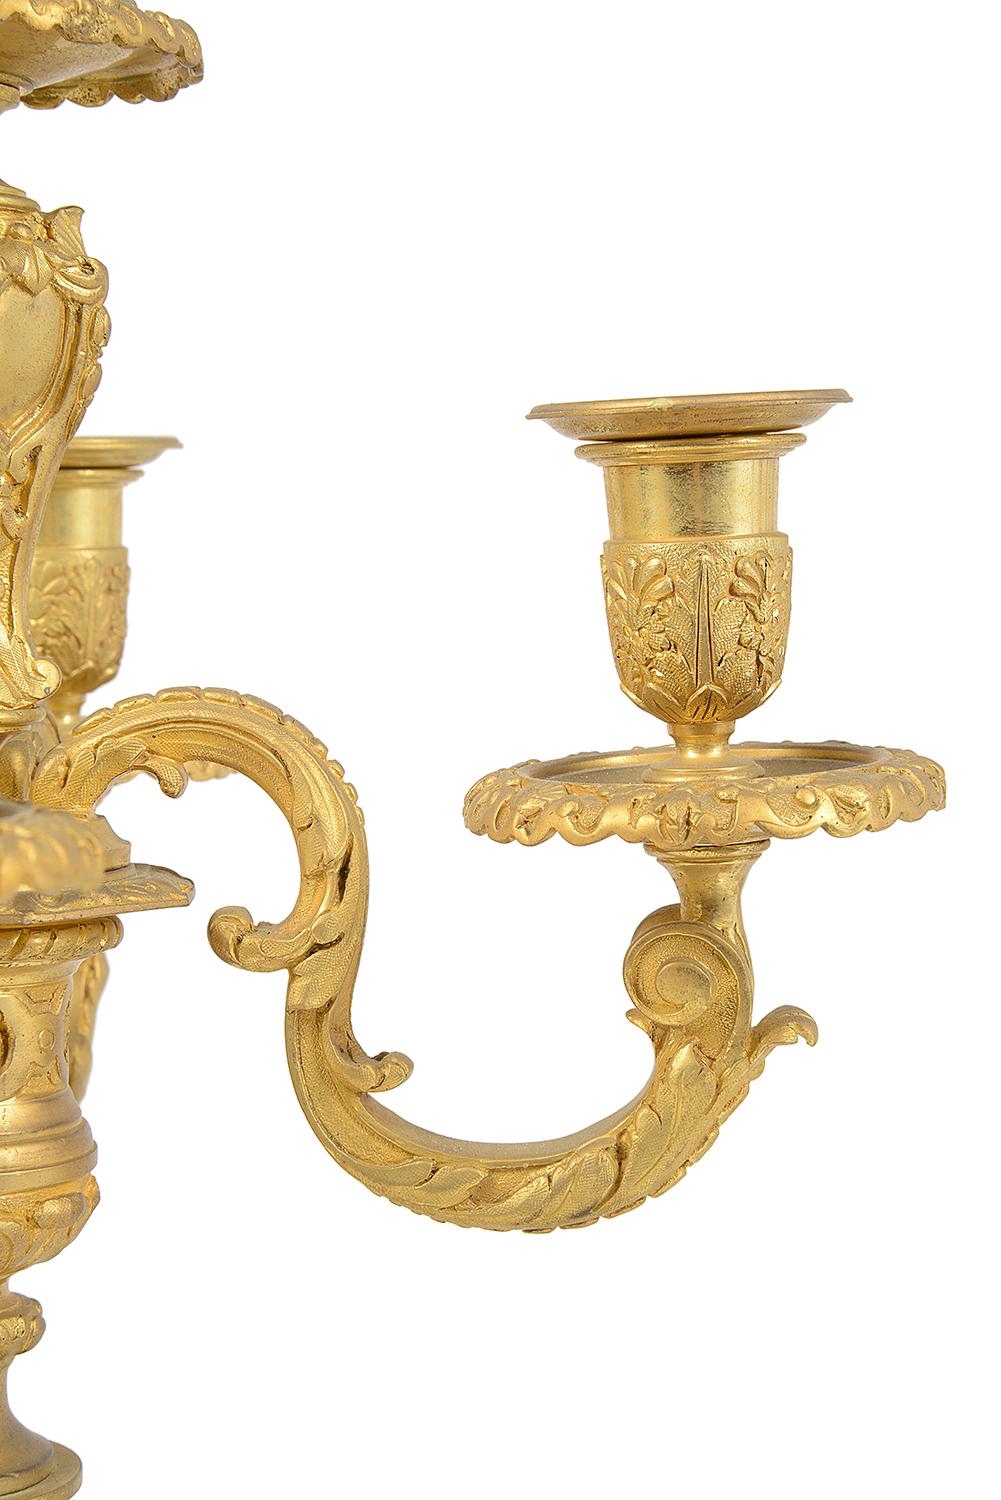 Gilt Pair of Classical 19th Century Table Candelabra